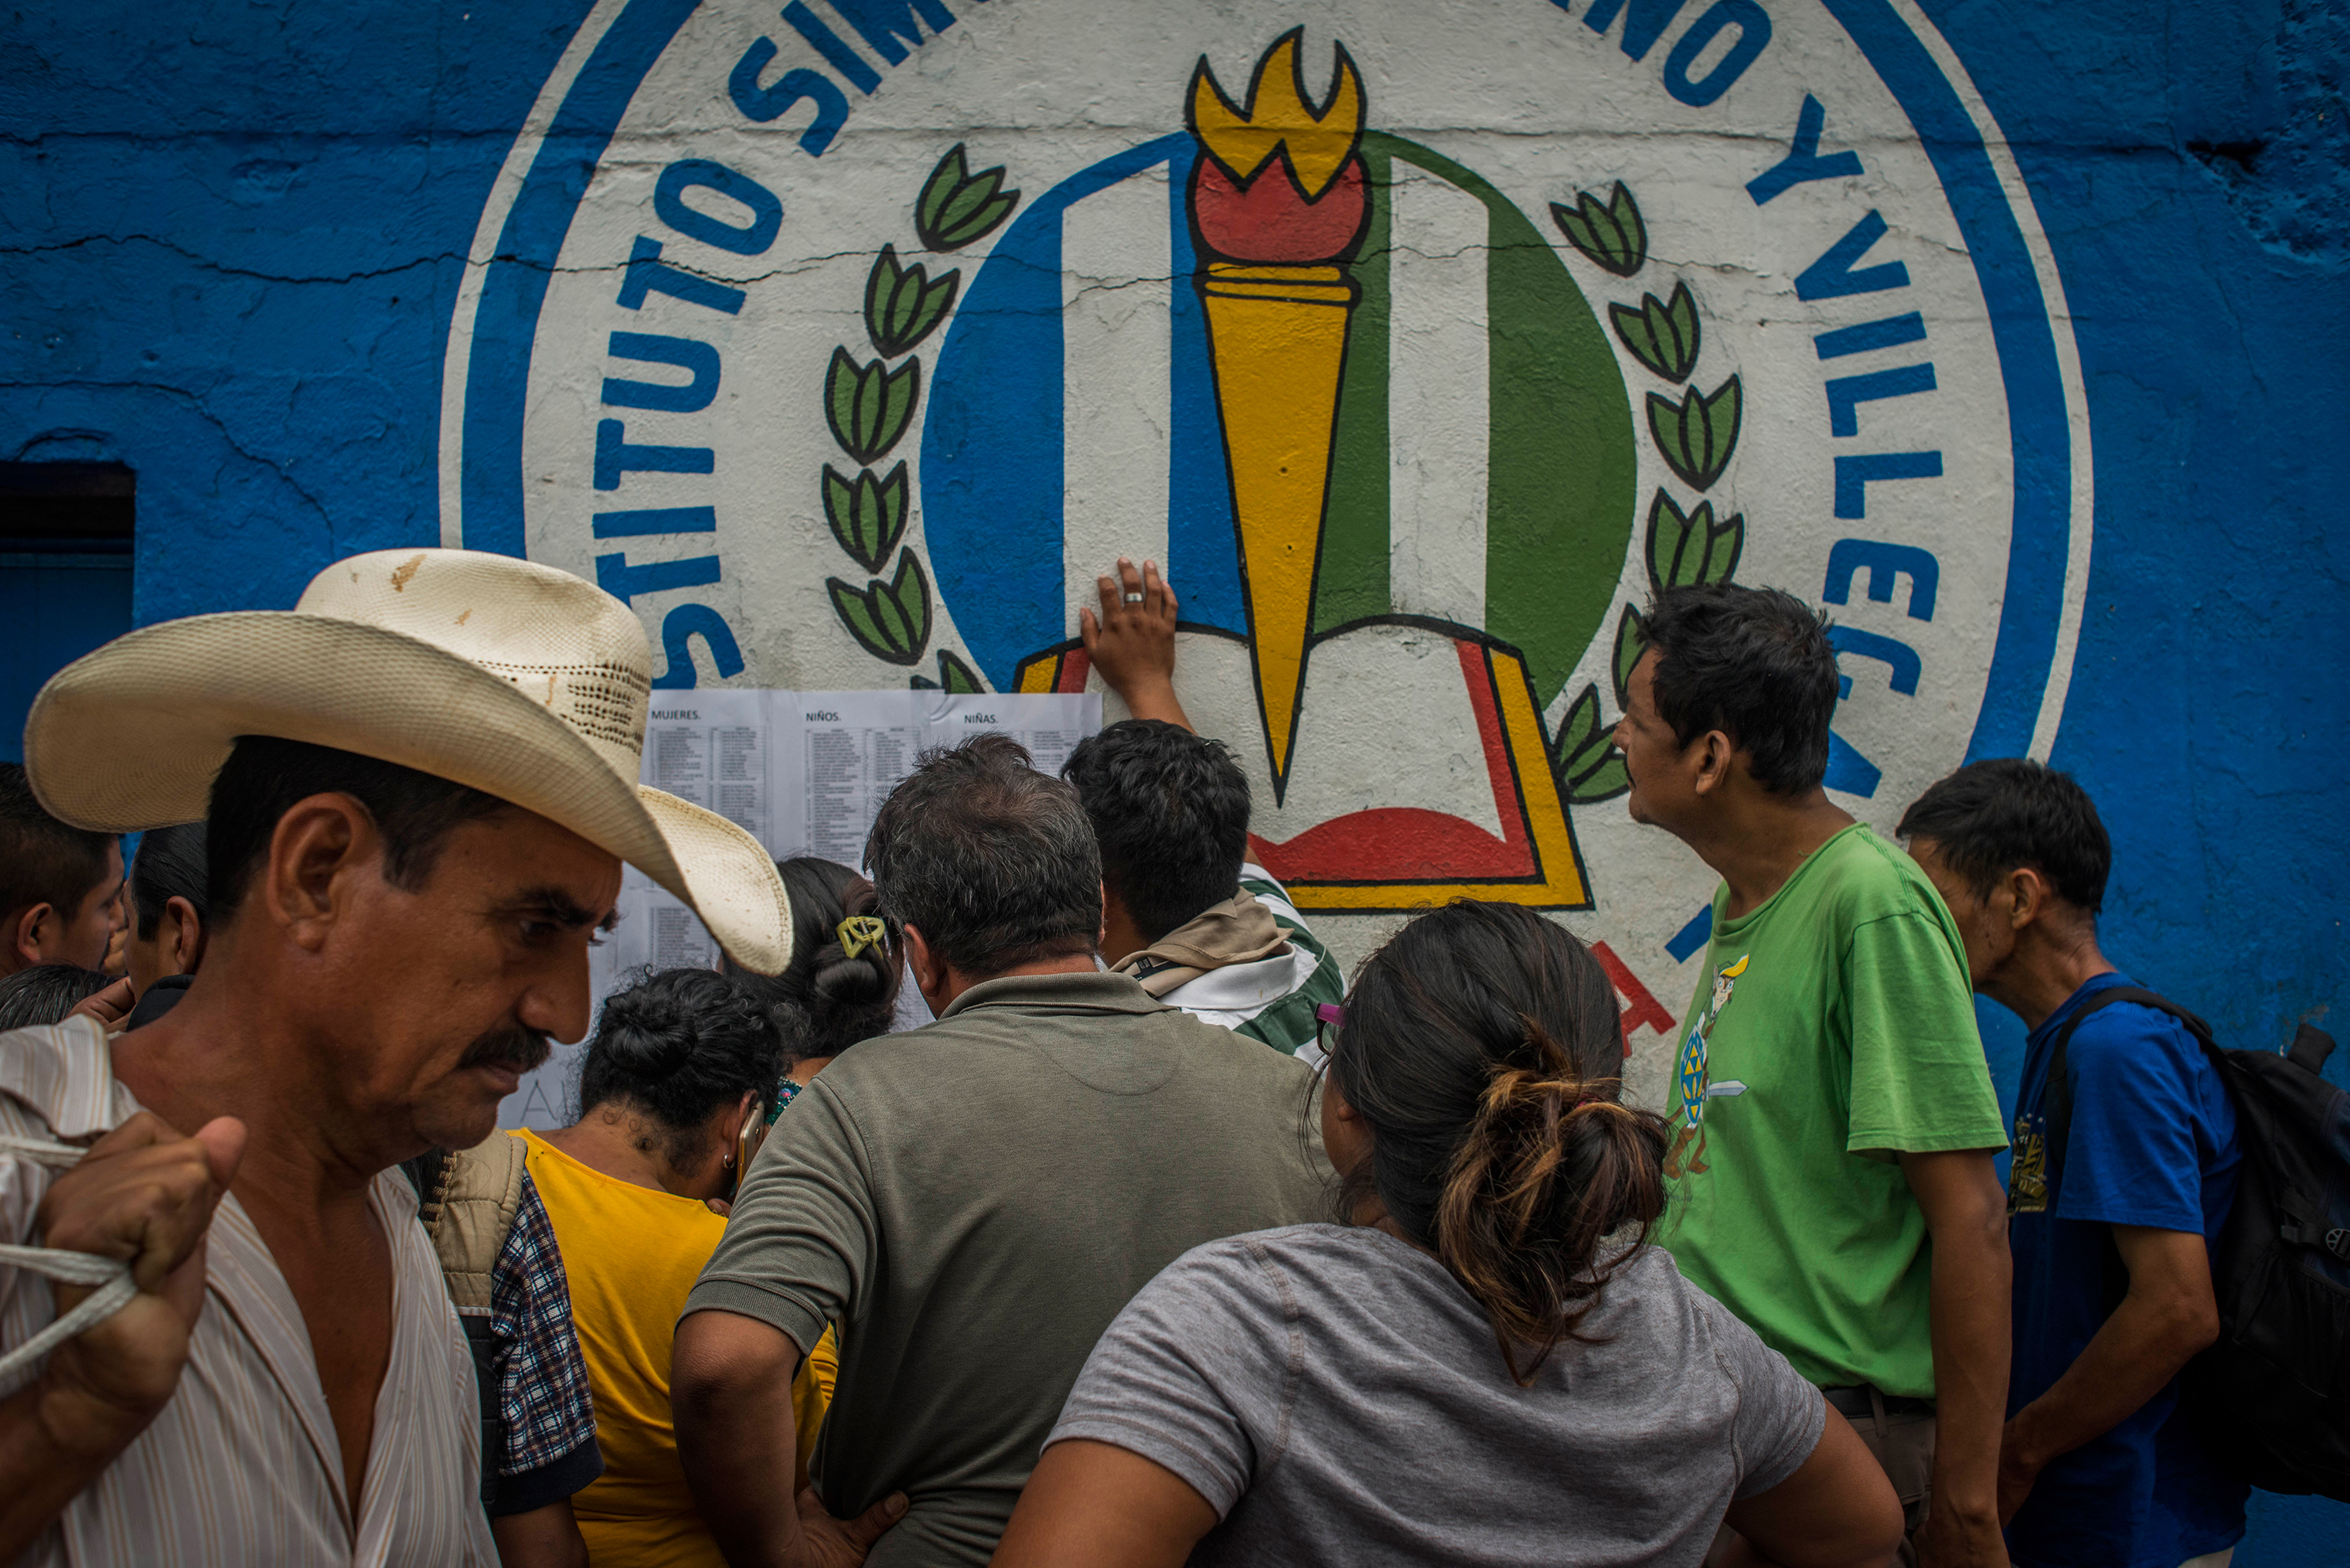 Residents of San Miguel Los Lotes look for relatives' names on a list of survivors at the entrance to a shelter in Escuintla on June 4. (Daniele Volpe)